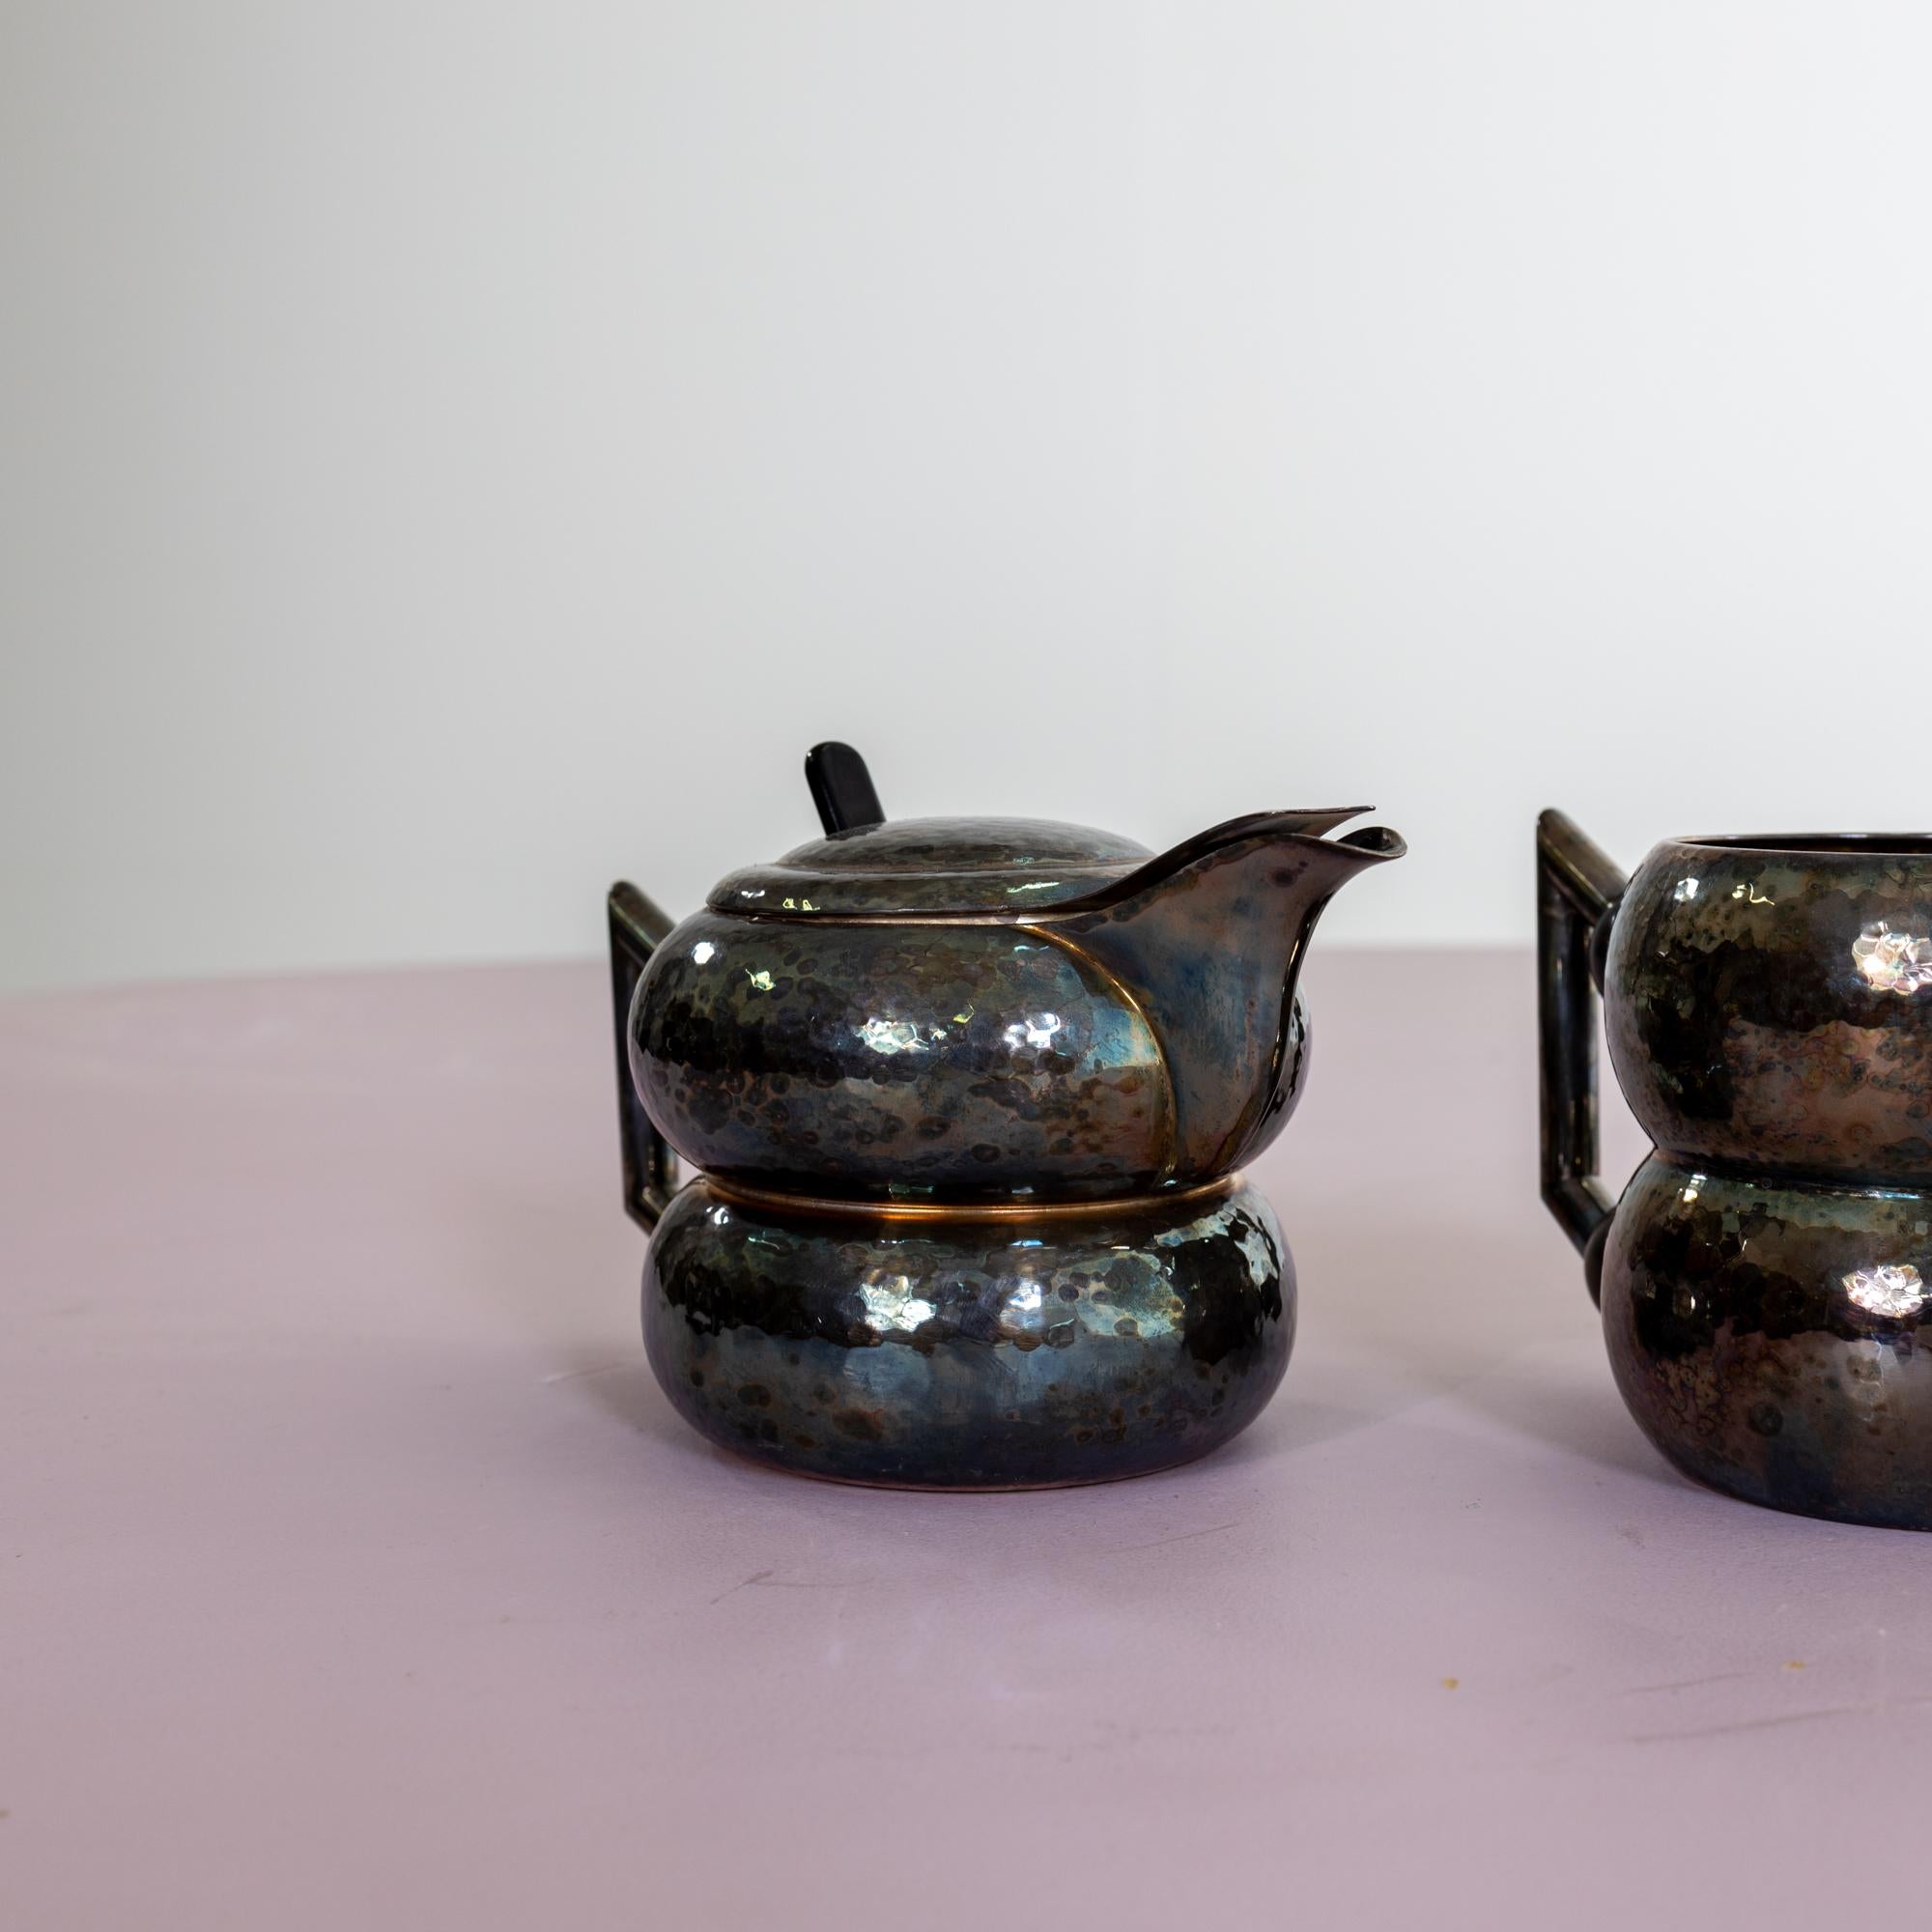 Decorative tea set consisting of a teapot, a milk jug and a coffee pot in double-bellied shape and textured wall. The acute-angled handles are connected to the body via black wooden beads, which insulates the handle from the heat.